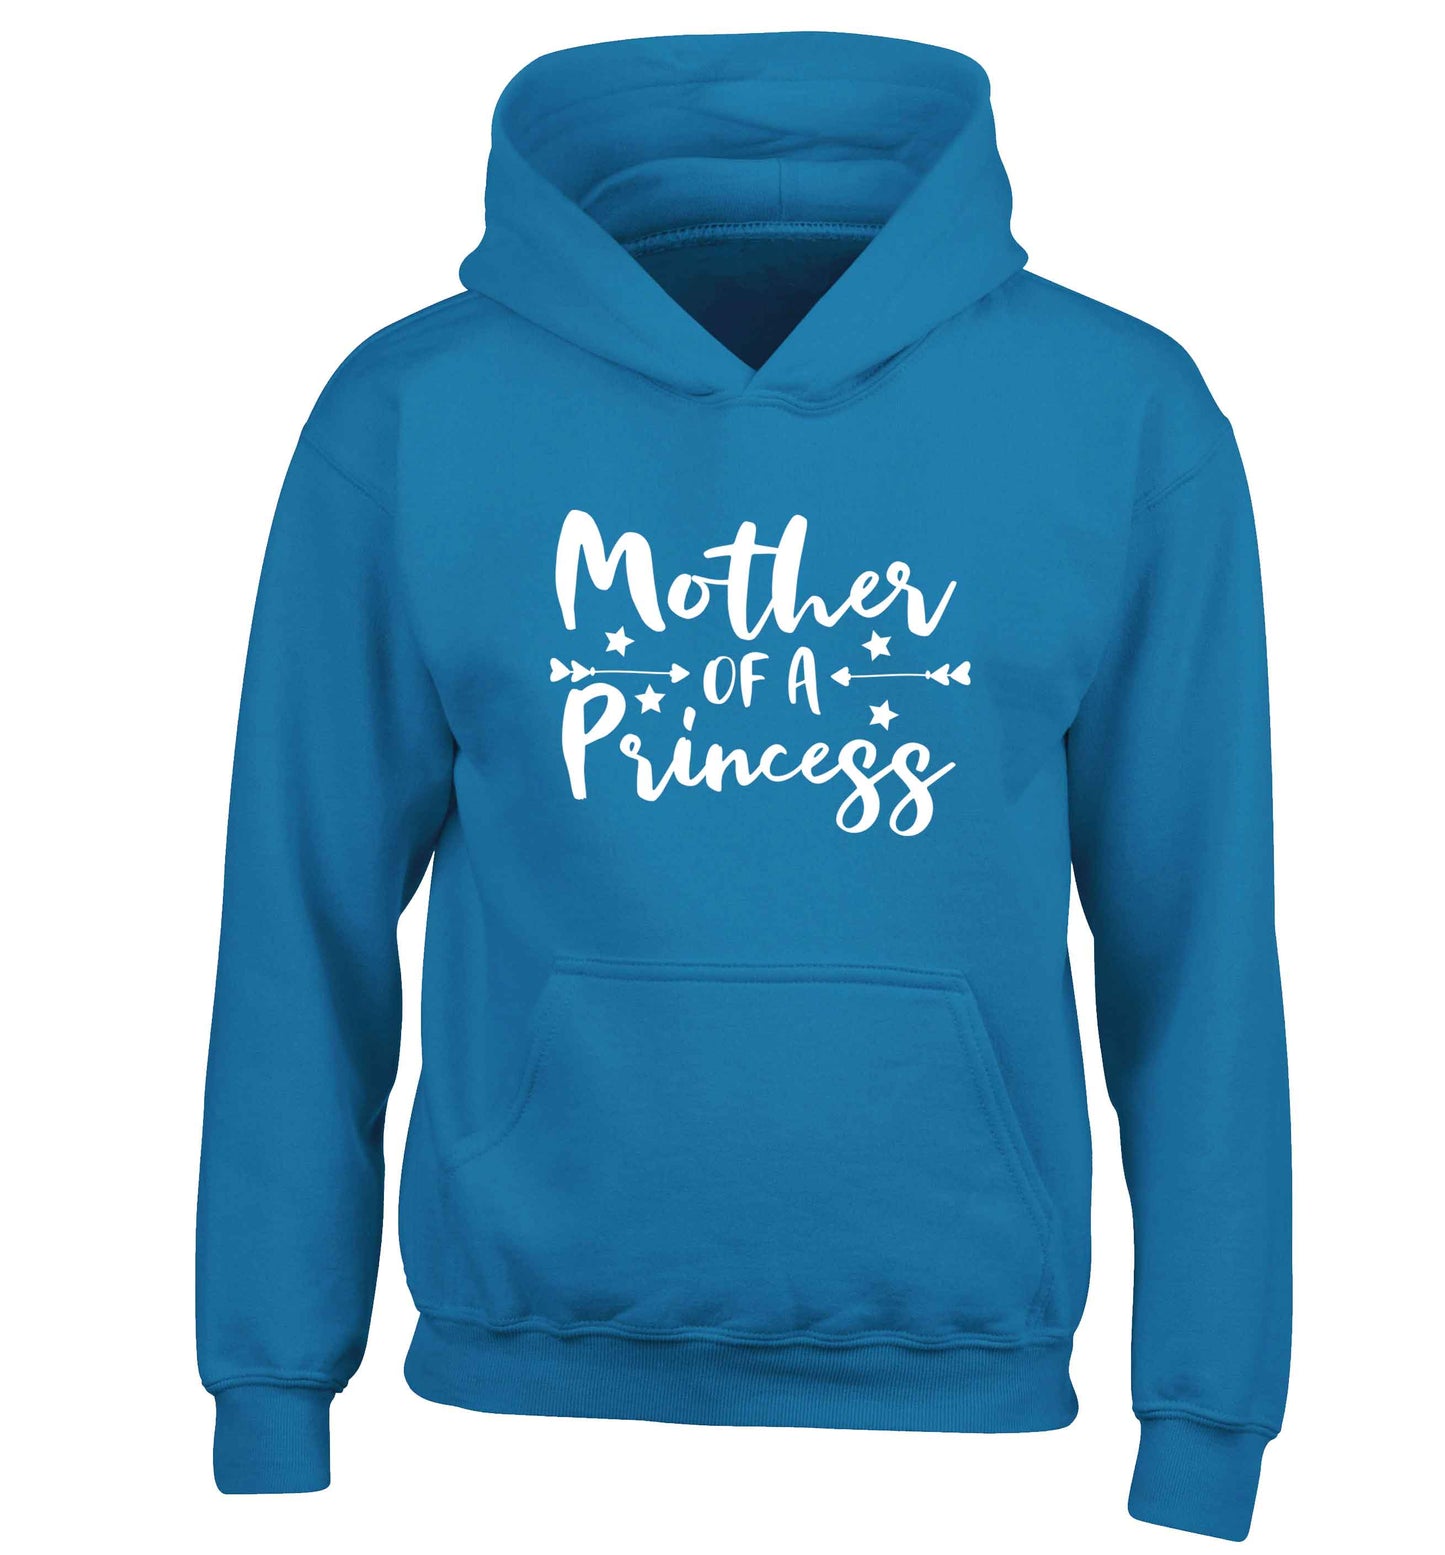 Mother of a princess children's blue hoodie 12-13 Years